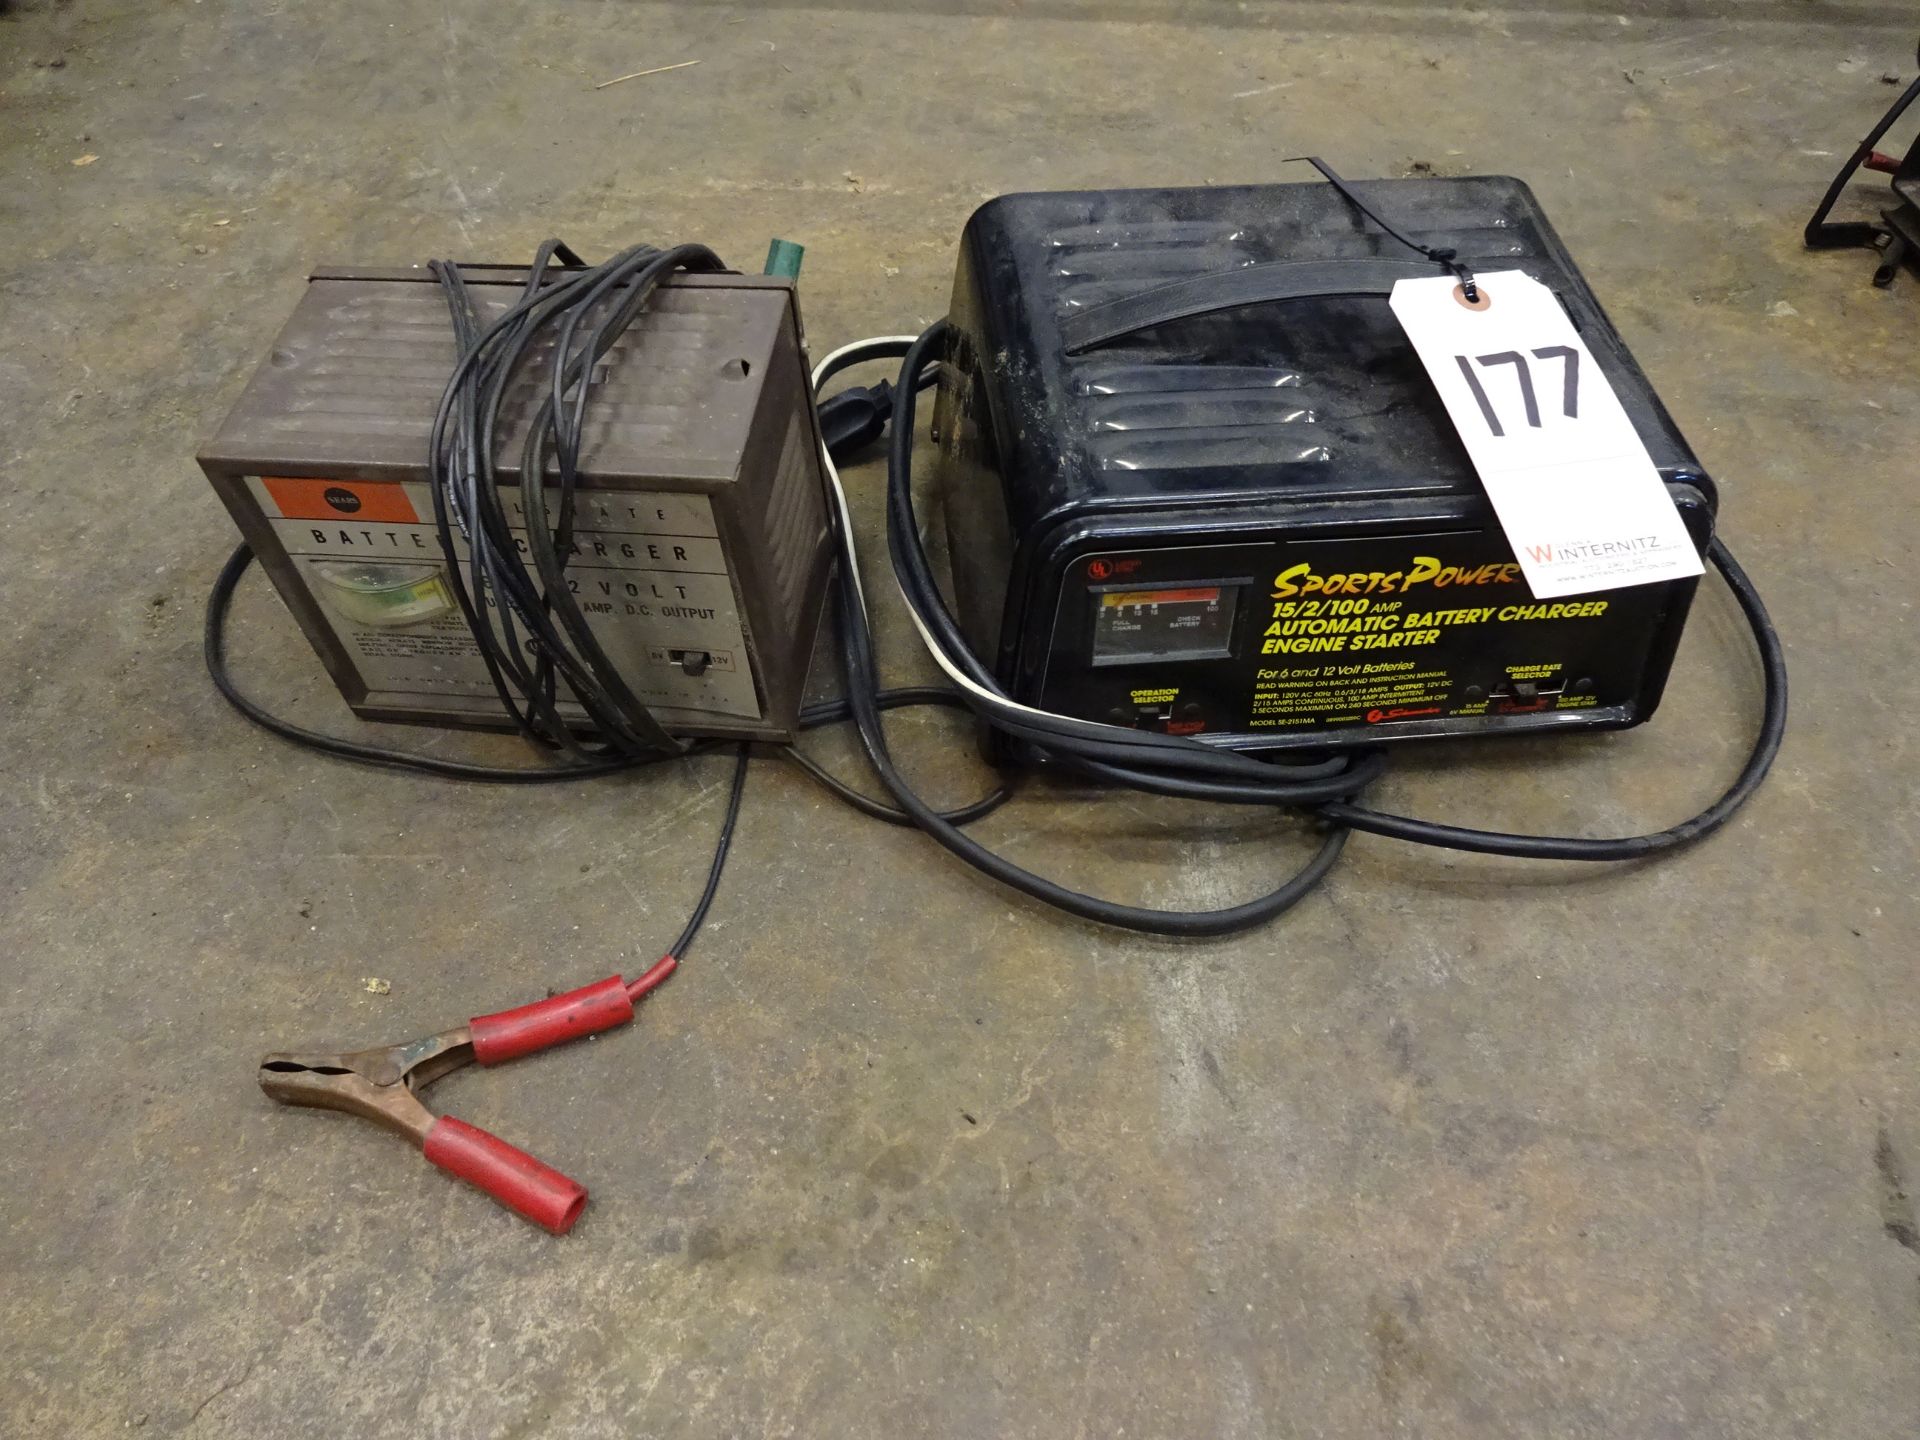 LOT: ALLSTATE & SPORTS POWER BATTERY CHARGERS